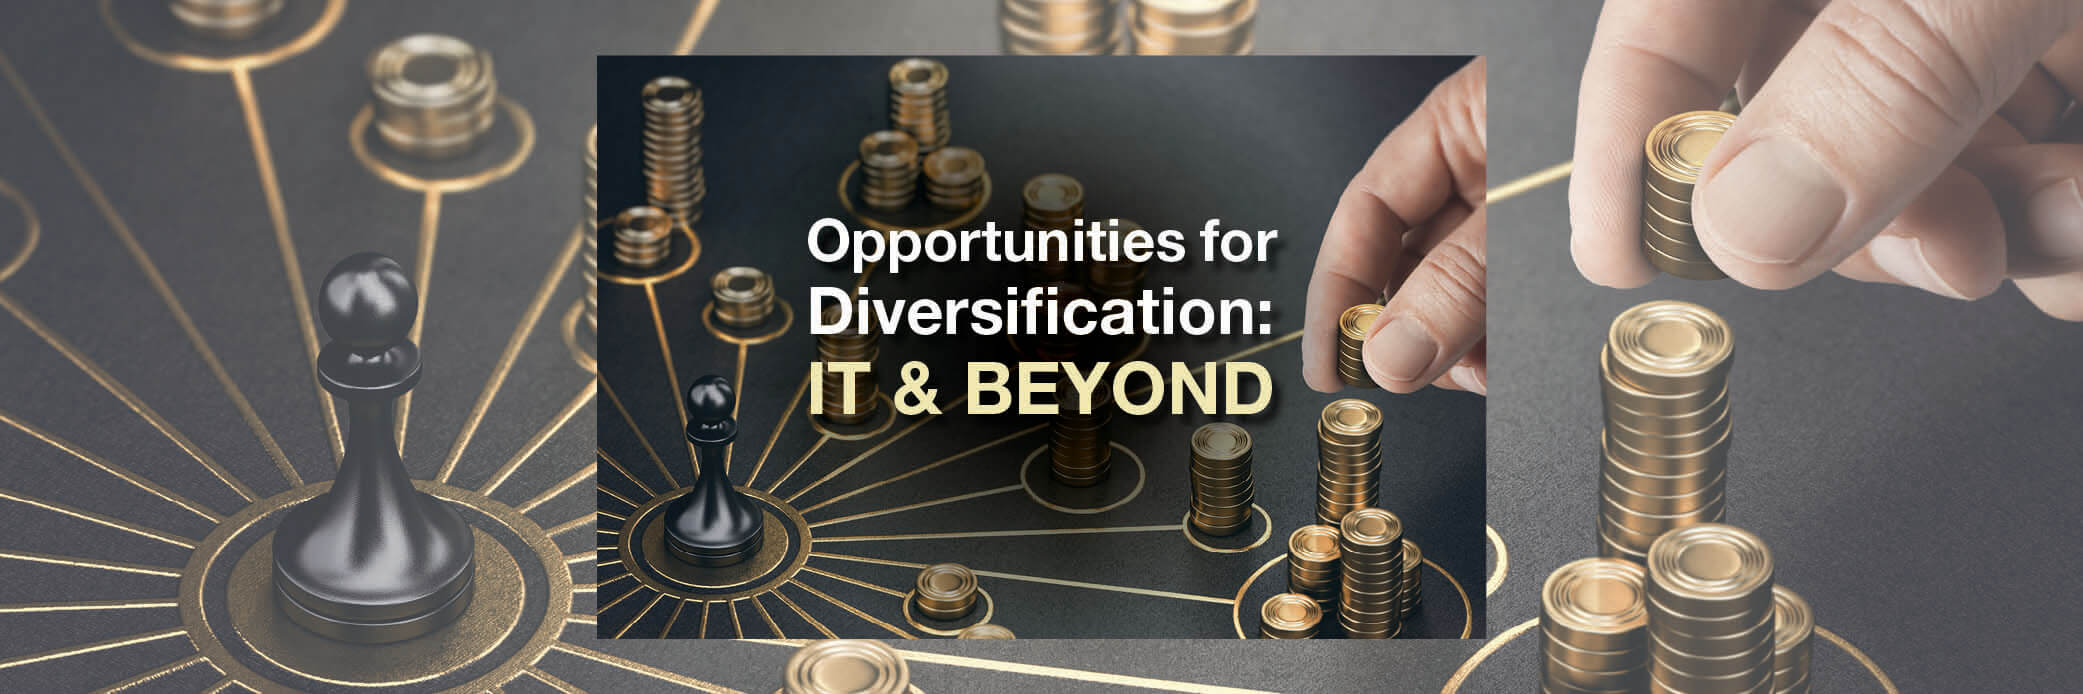 Opportunities for Diversification: IT & Beyond